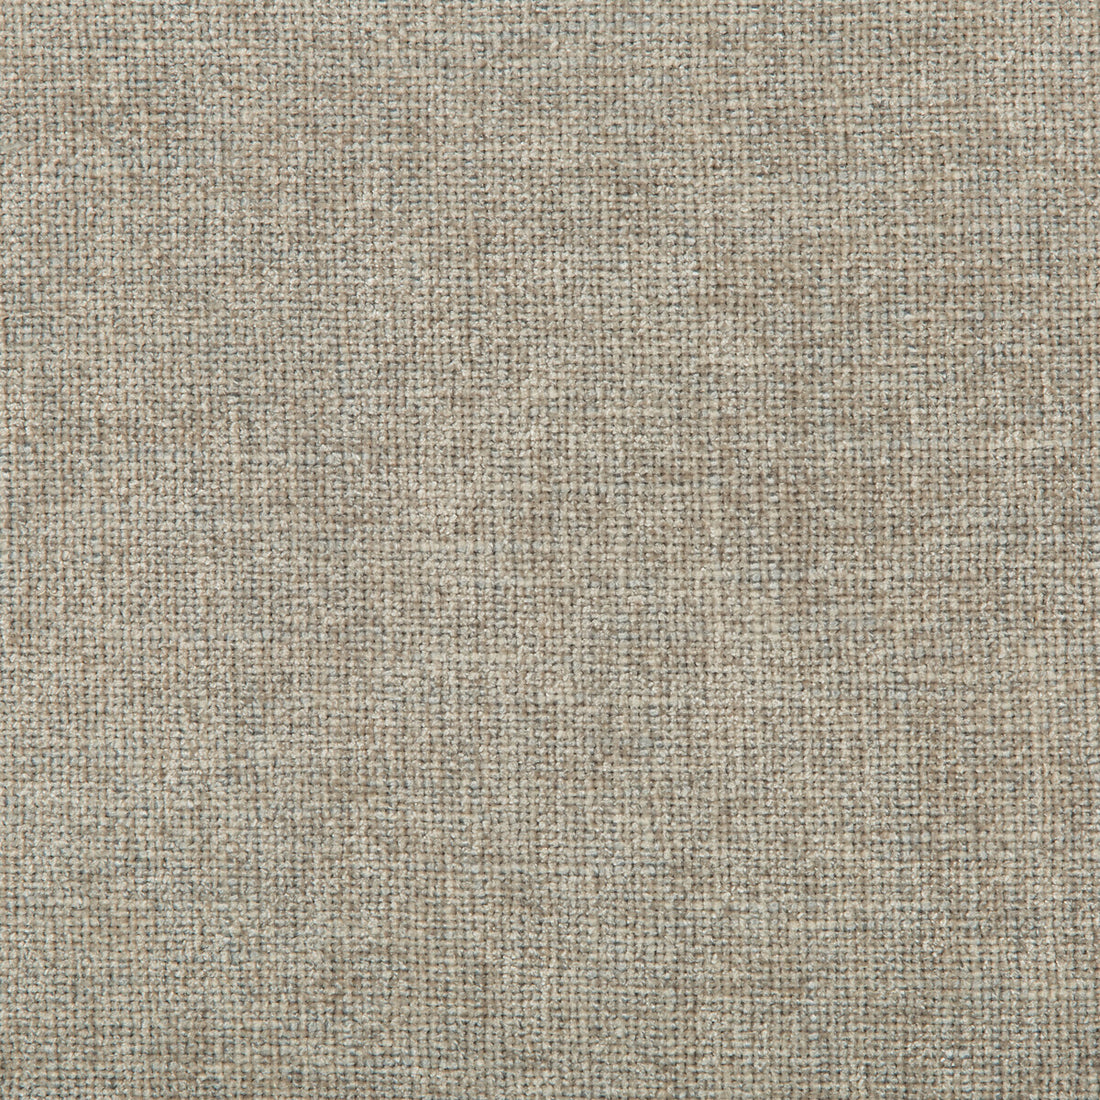 Kravet Couture fabric in 34808-11 color - pattern 34808.11.0 - by Kravet Couture in the Mabley Handler collection